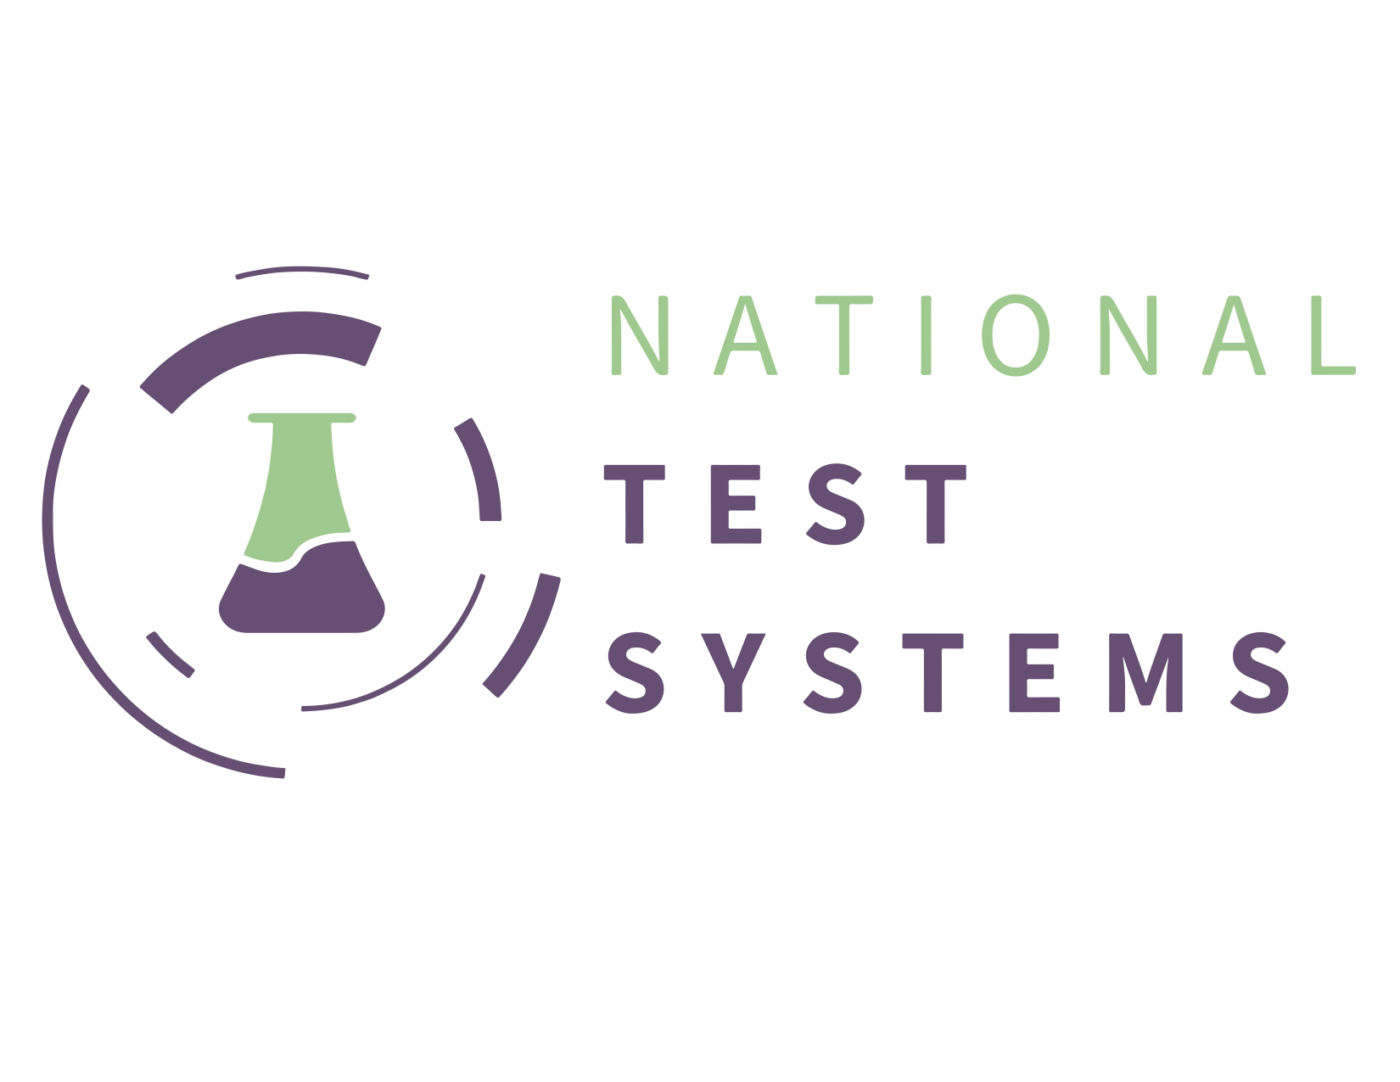 National Test Systems